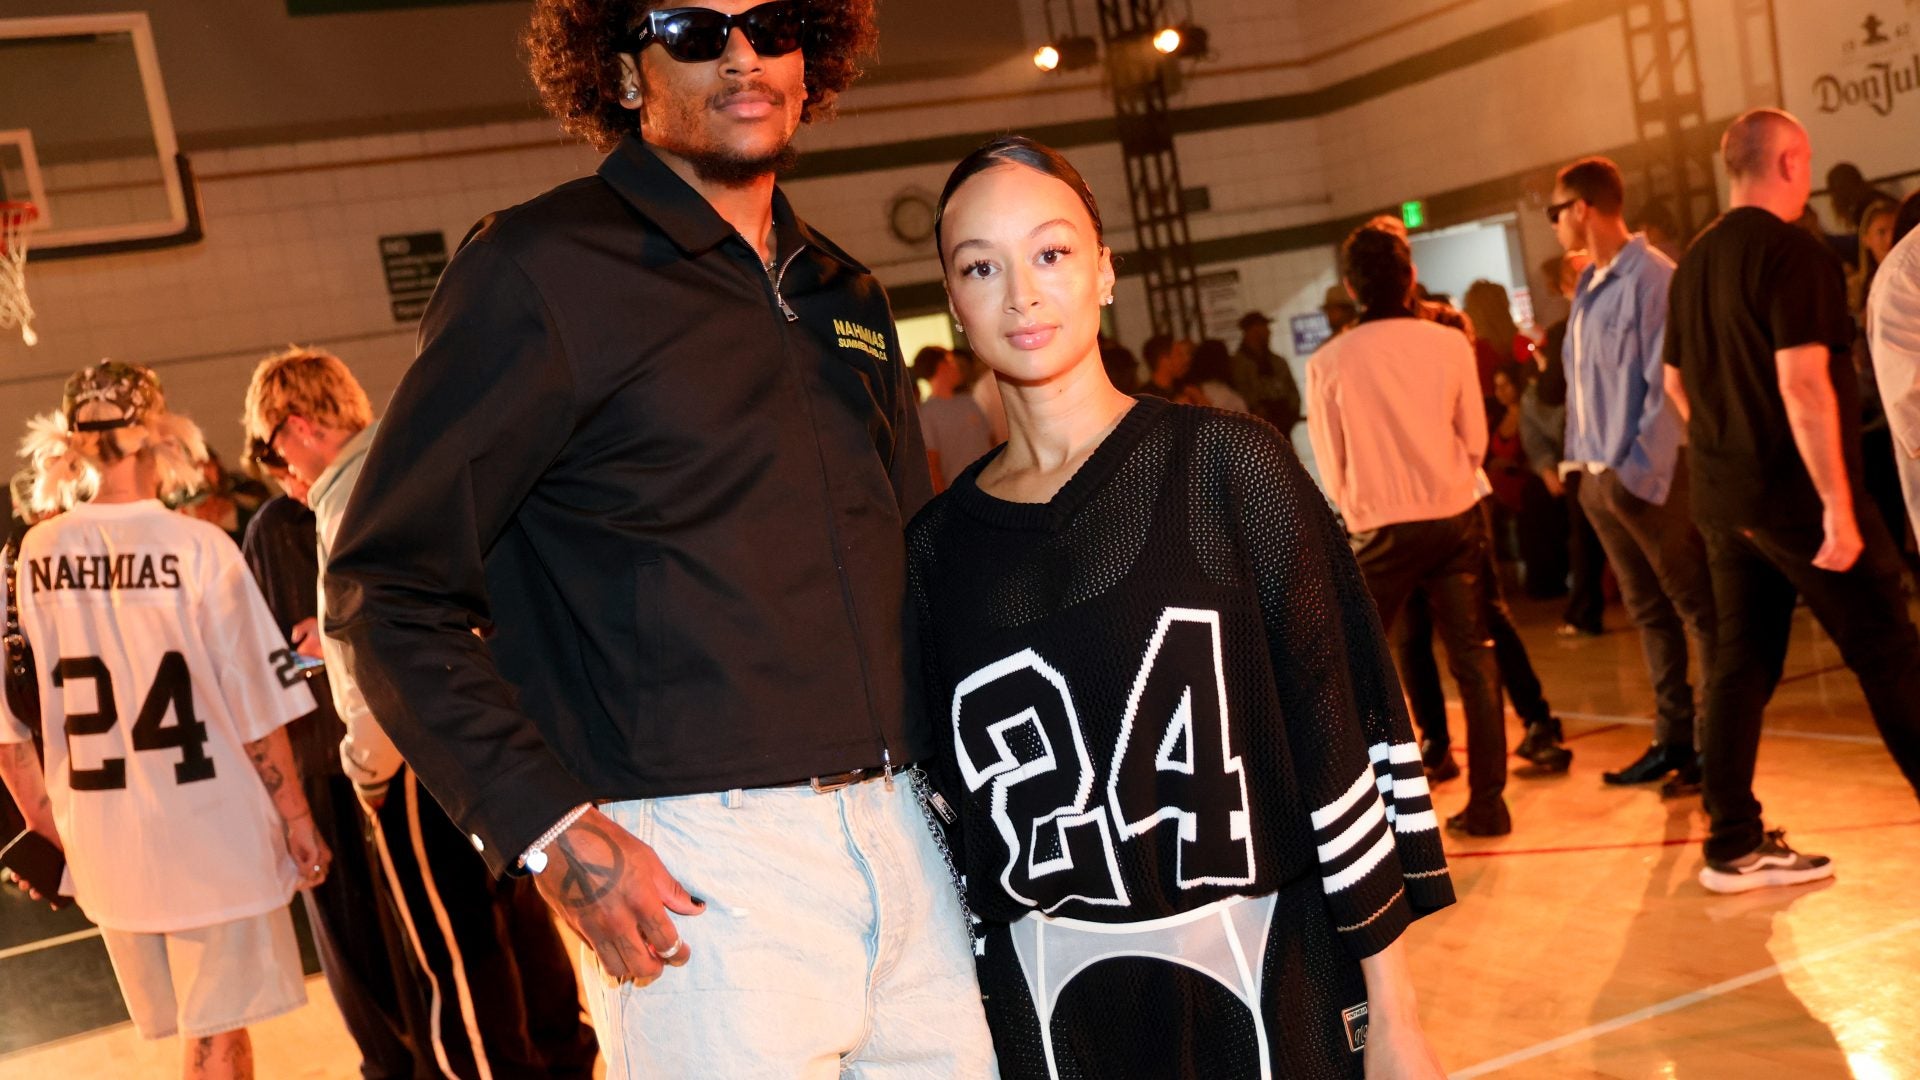 Draya Michele Responds To The 'Strange' Criticism About Her Relationship